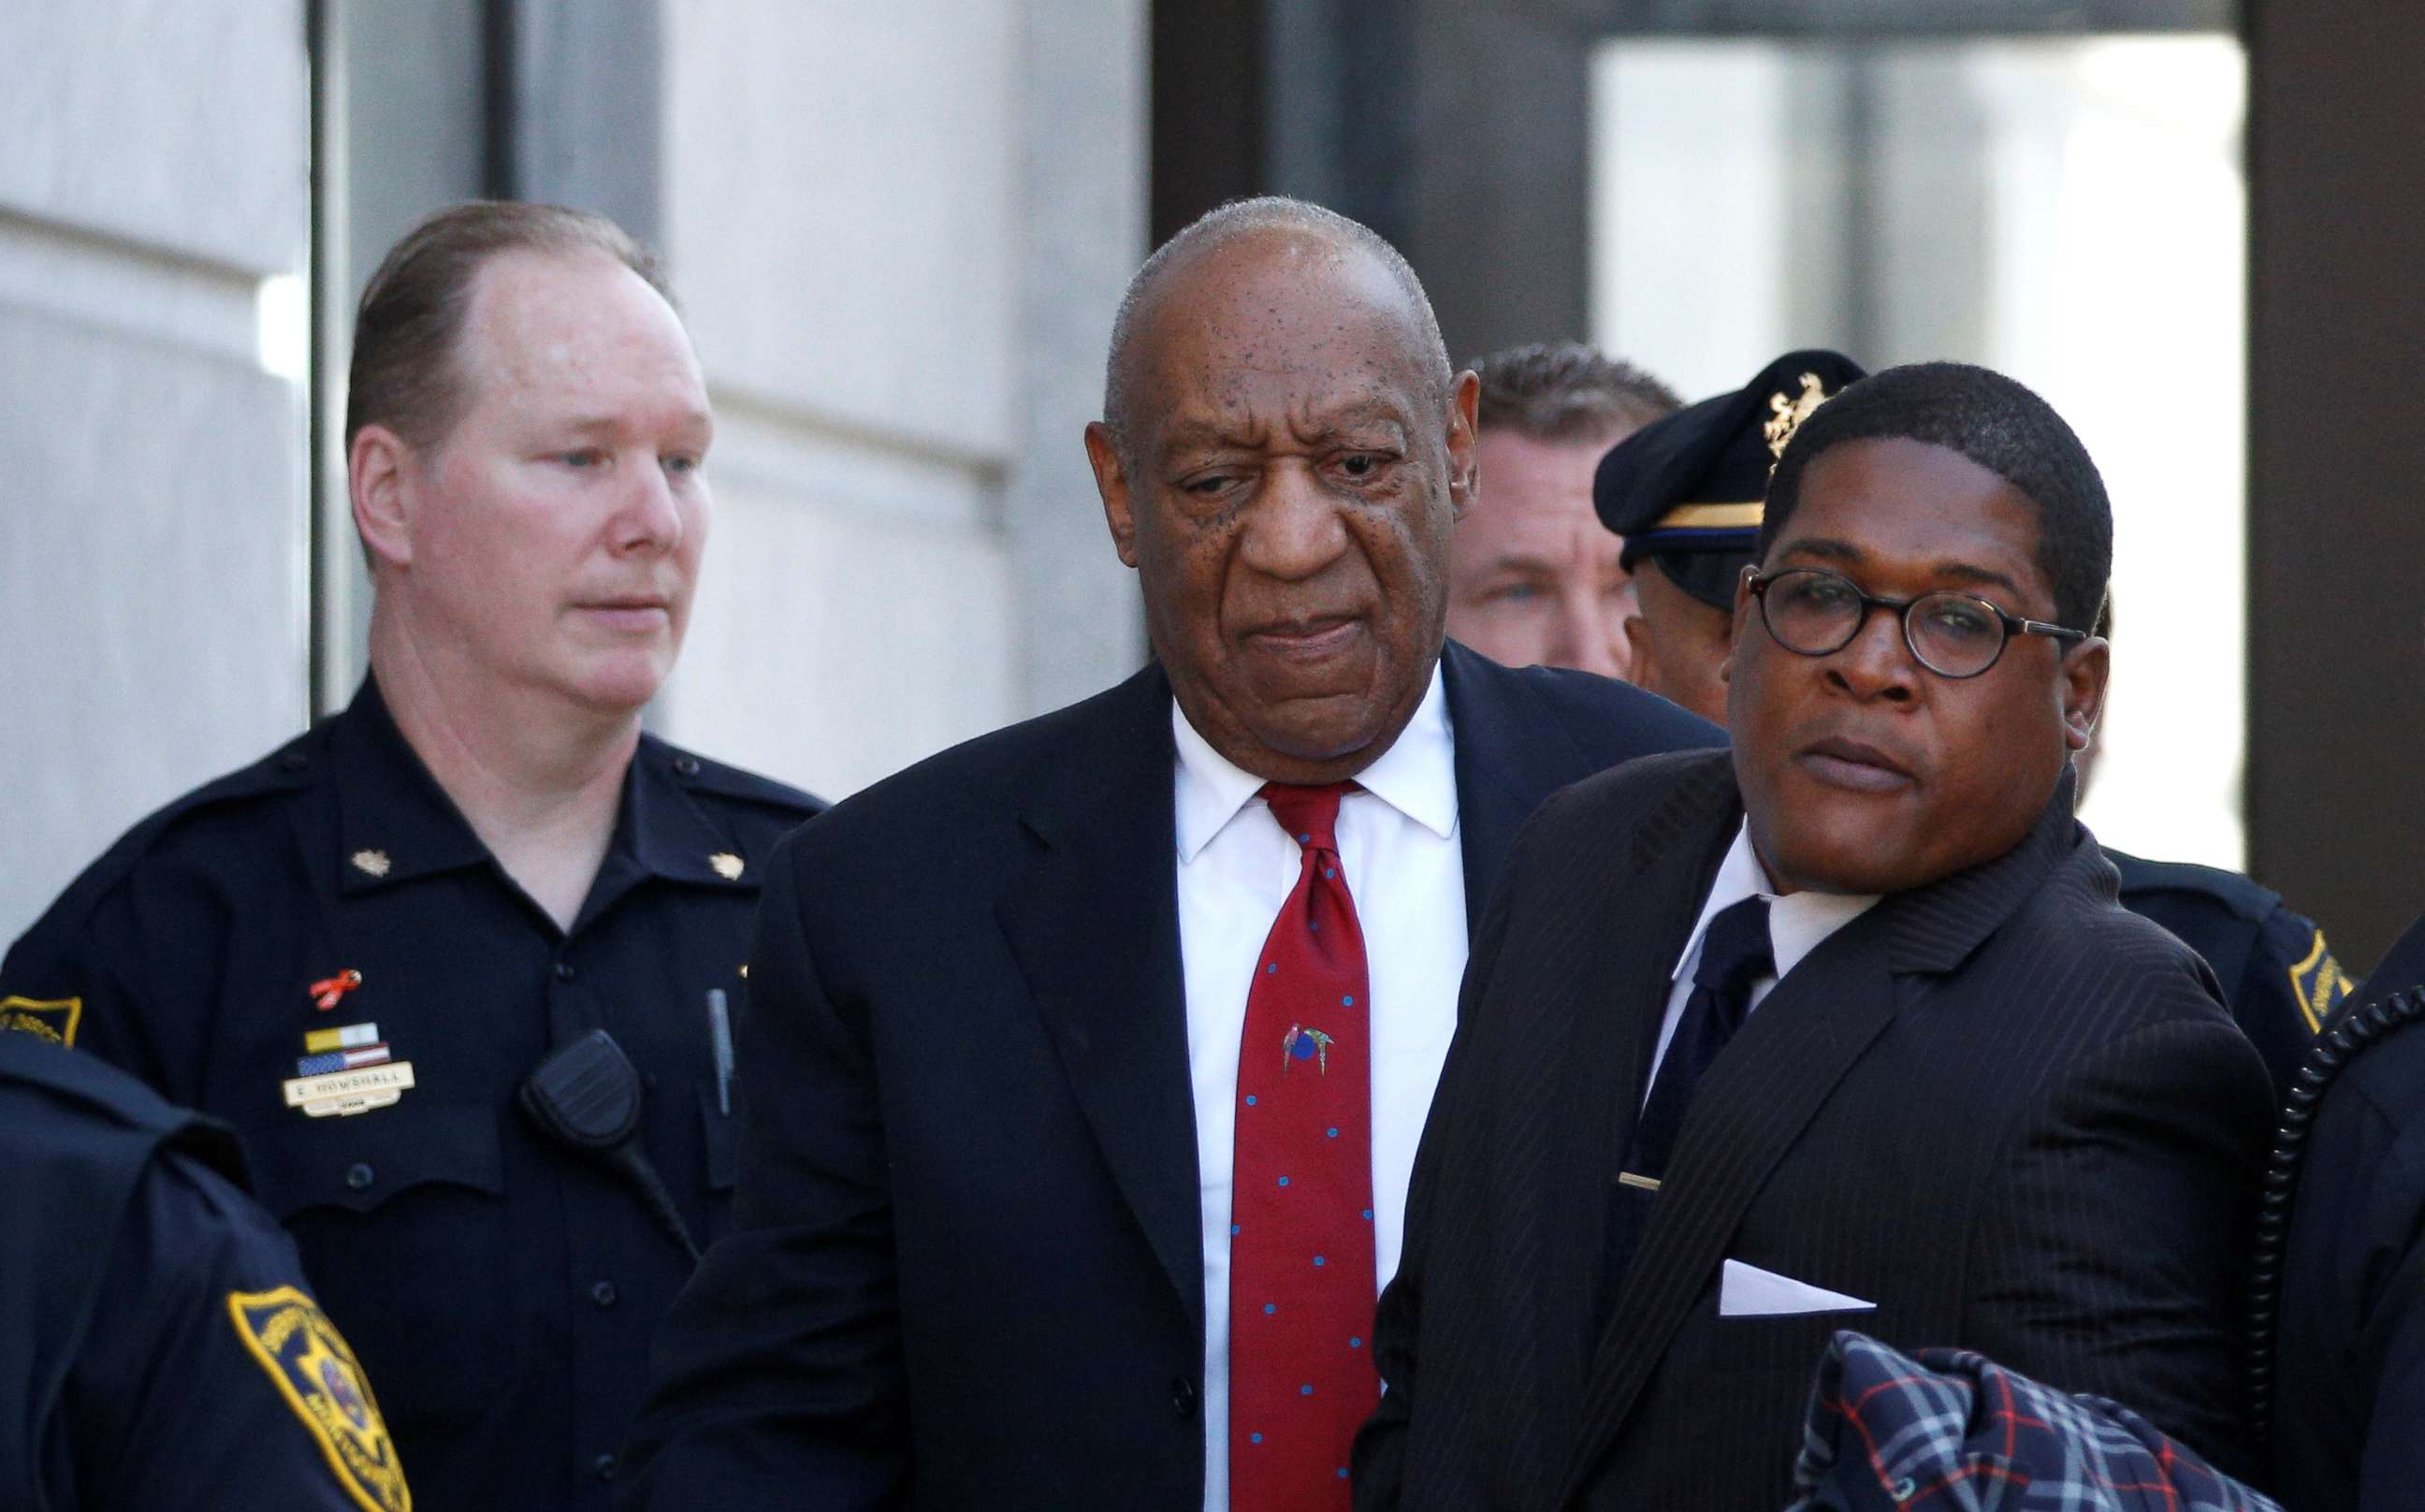 PHOTO: Actor and comedian Bill Cosby exits Montgomery County Courthouse after a jury convicted him in a sexual assault retrial in Norristown, Penn., April 26, 2018.